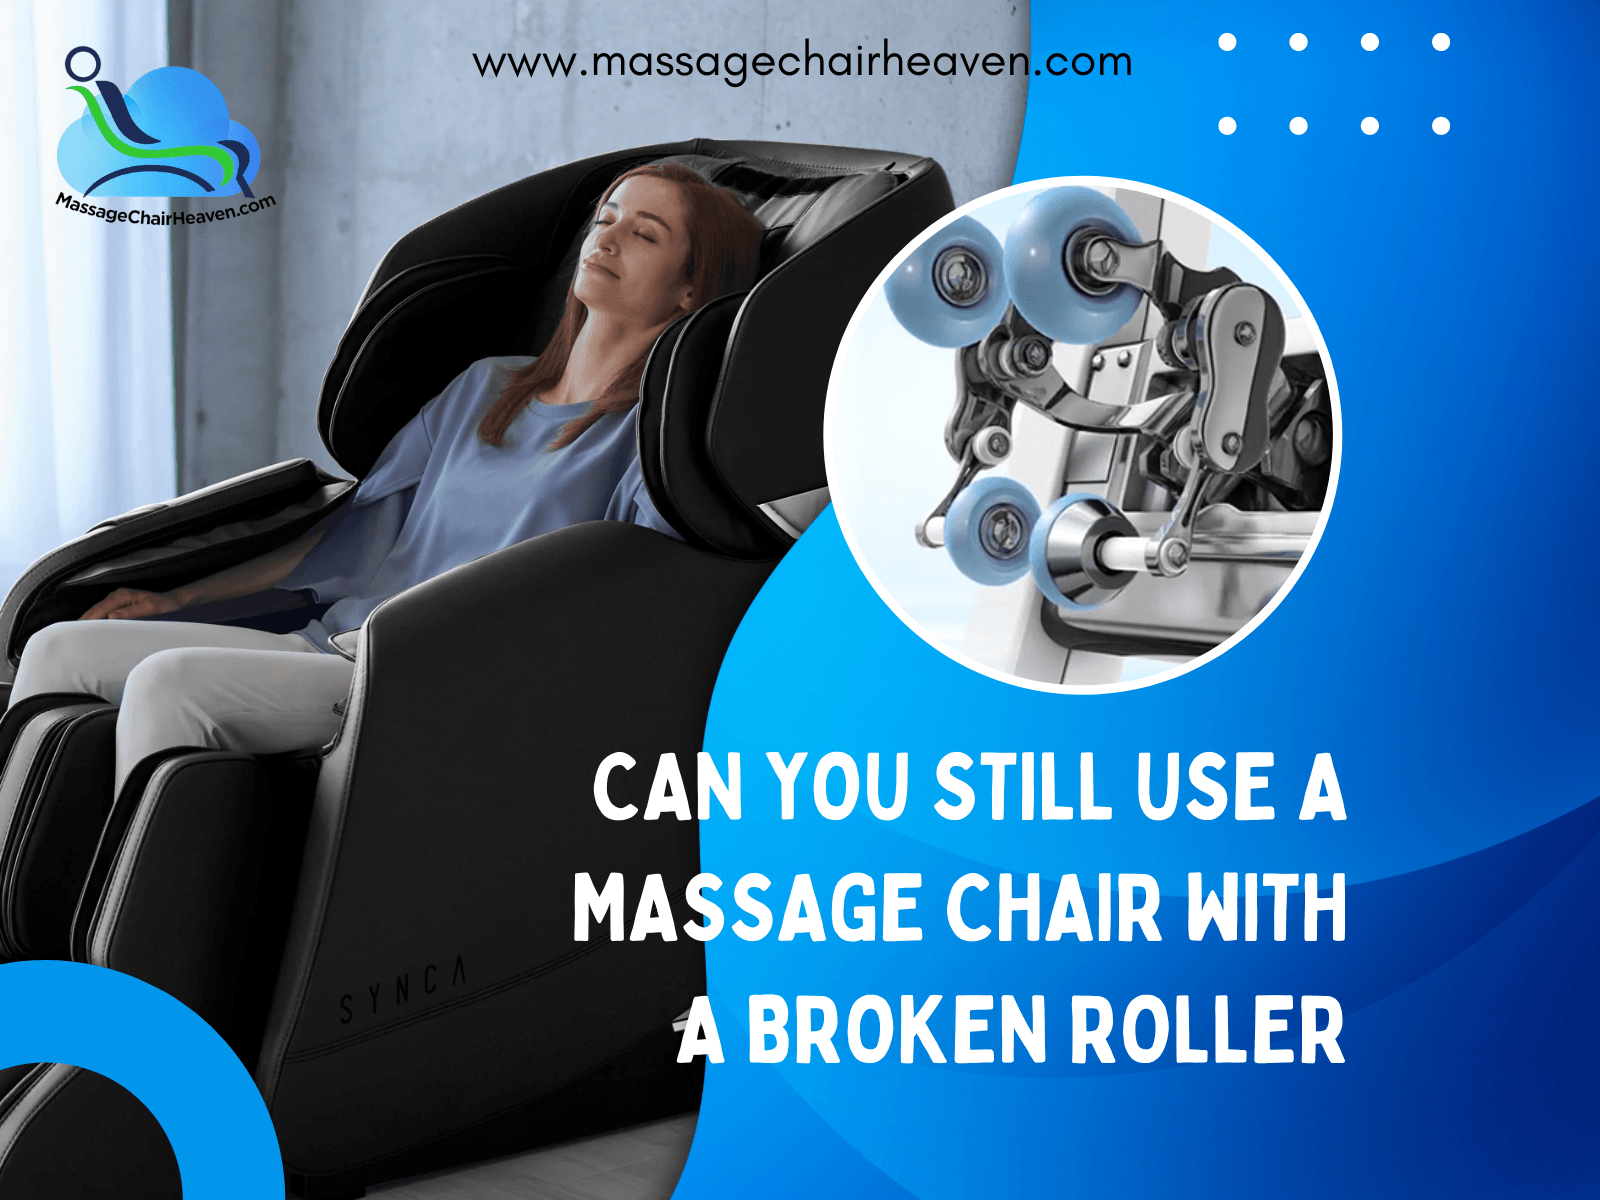 Can You Still Use a Massage Chair with A Broken Roller? - Massage Chair Heaven